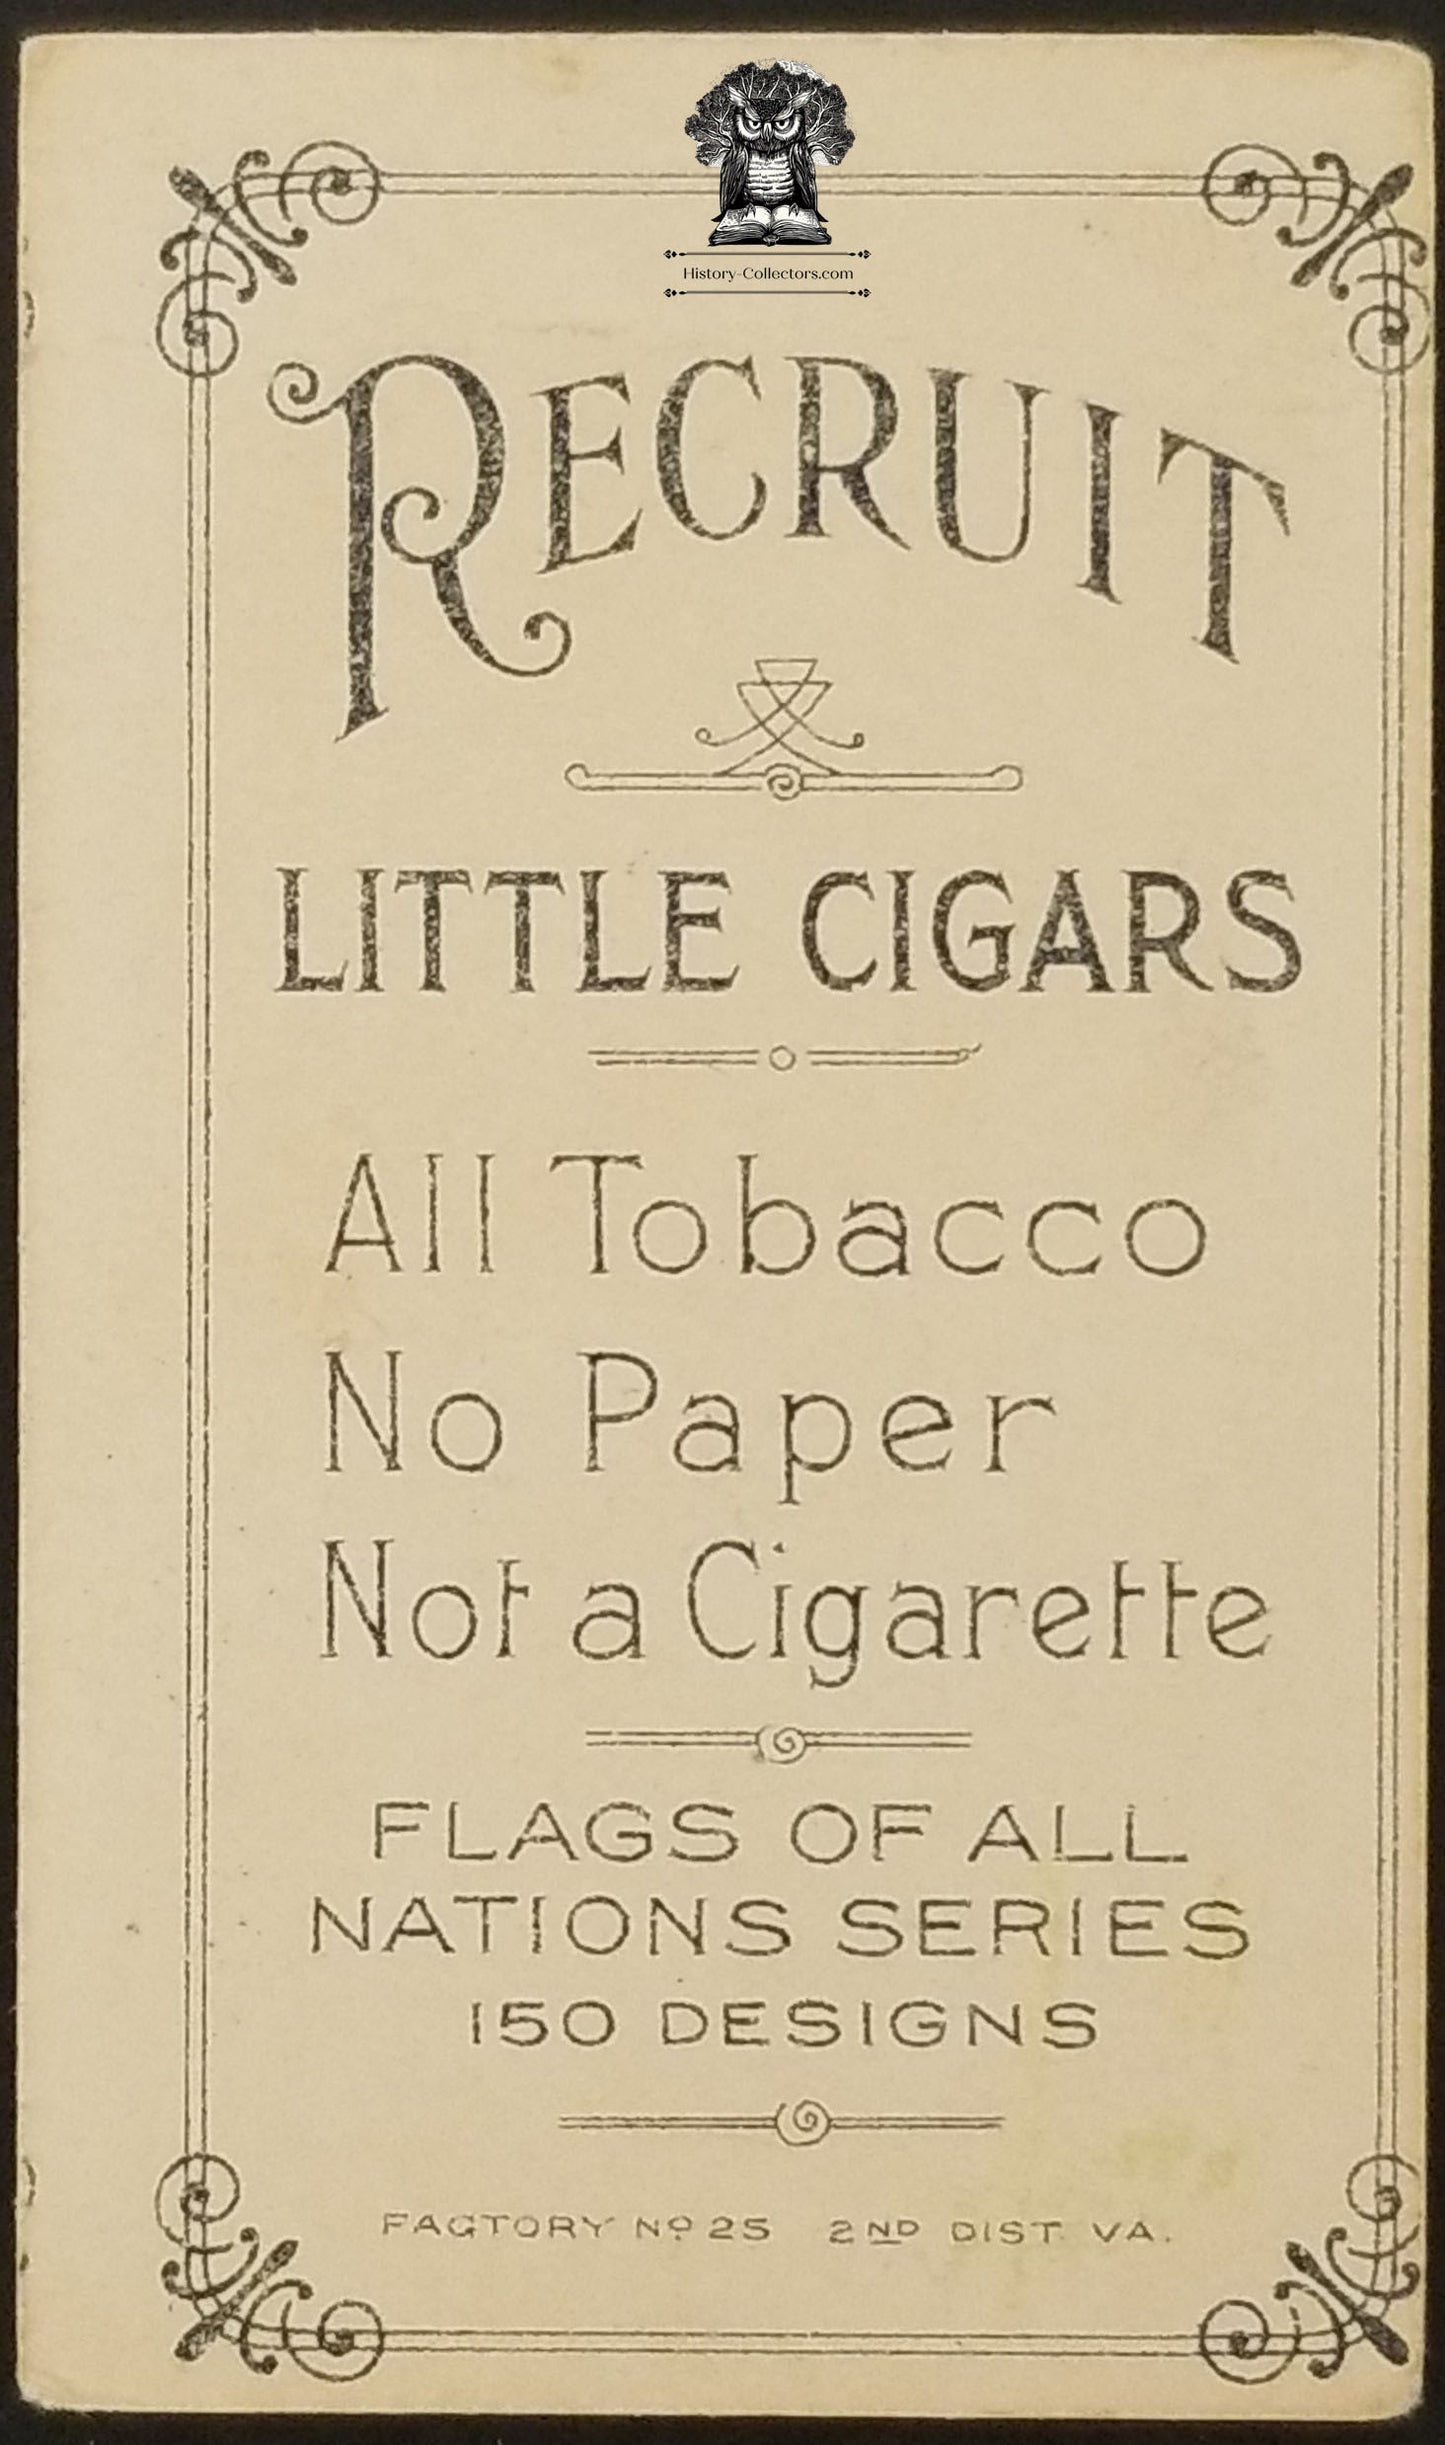 1909 Recruit Little Cigars Tobacco Trading Card - Flags of All Nations Series - Dublin